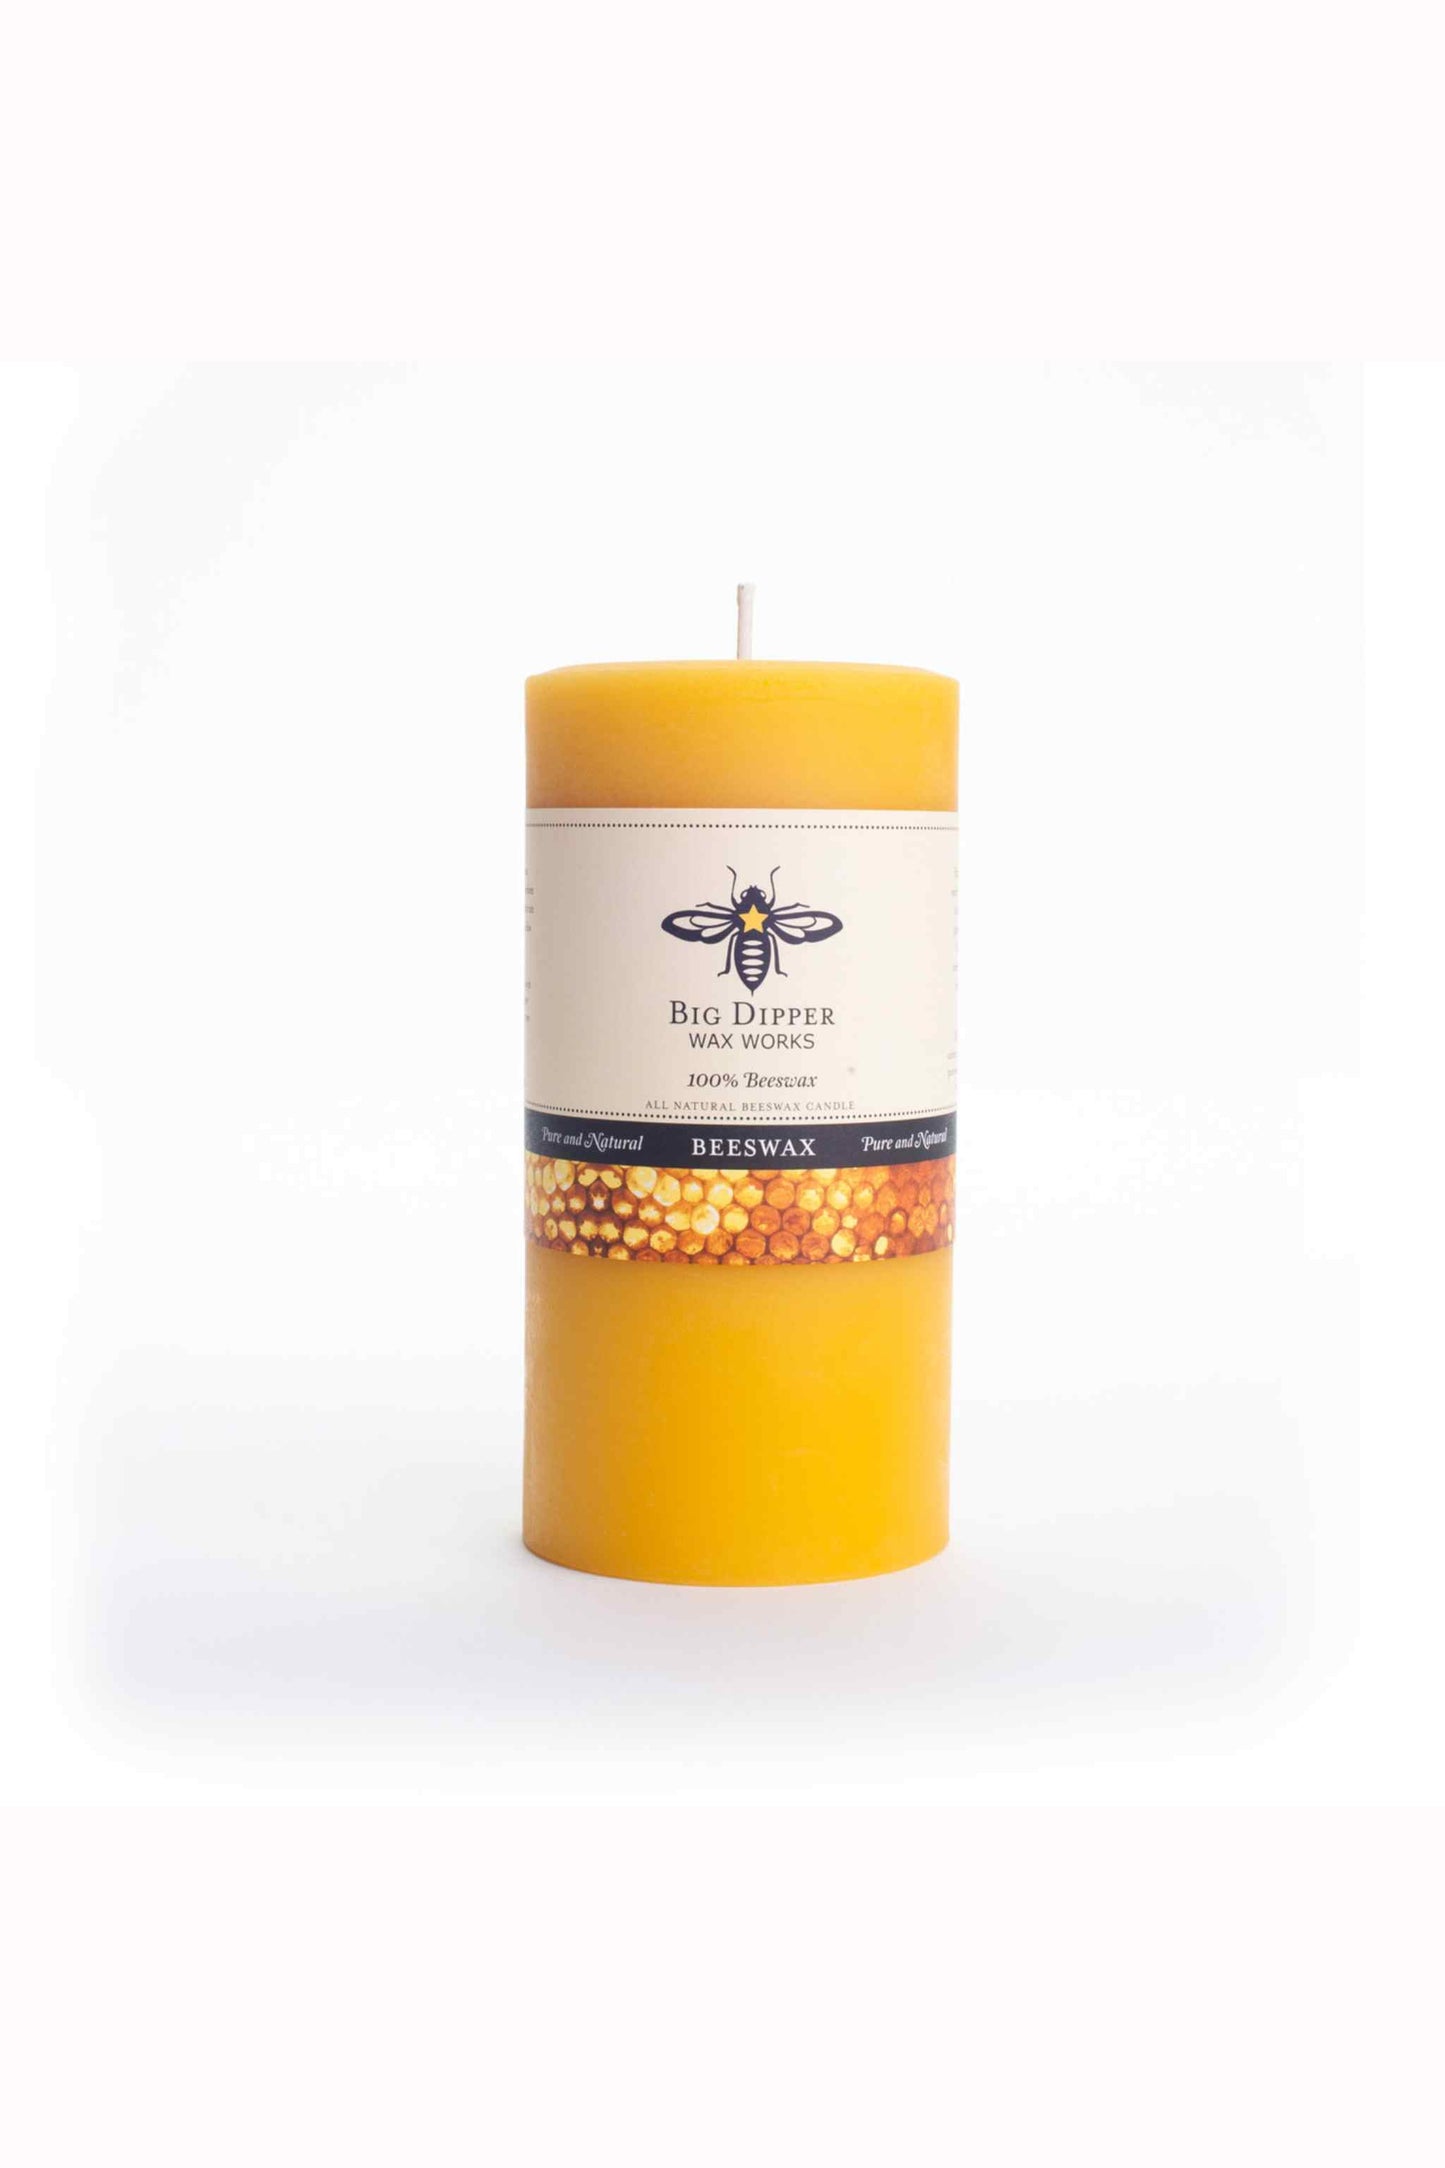 Pure Beeswax Candles – BEE Zero Waste